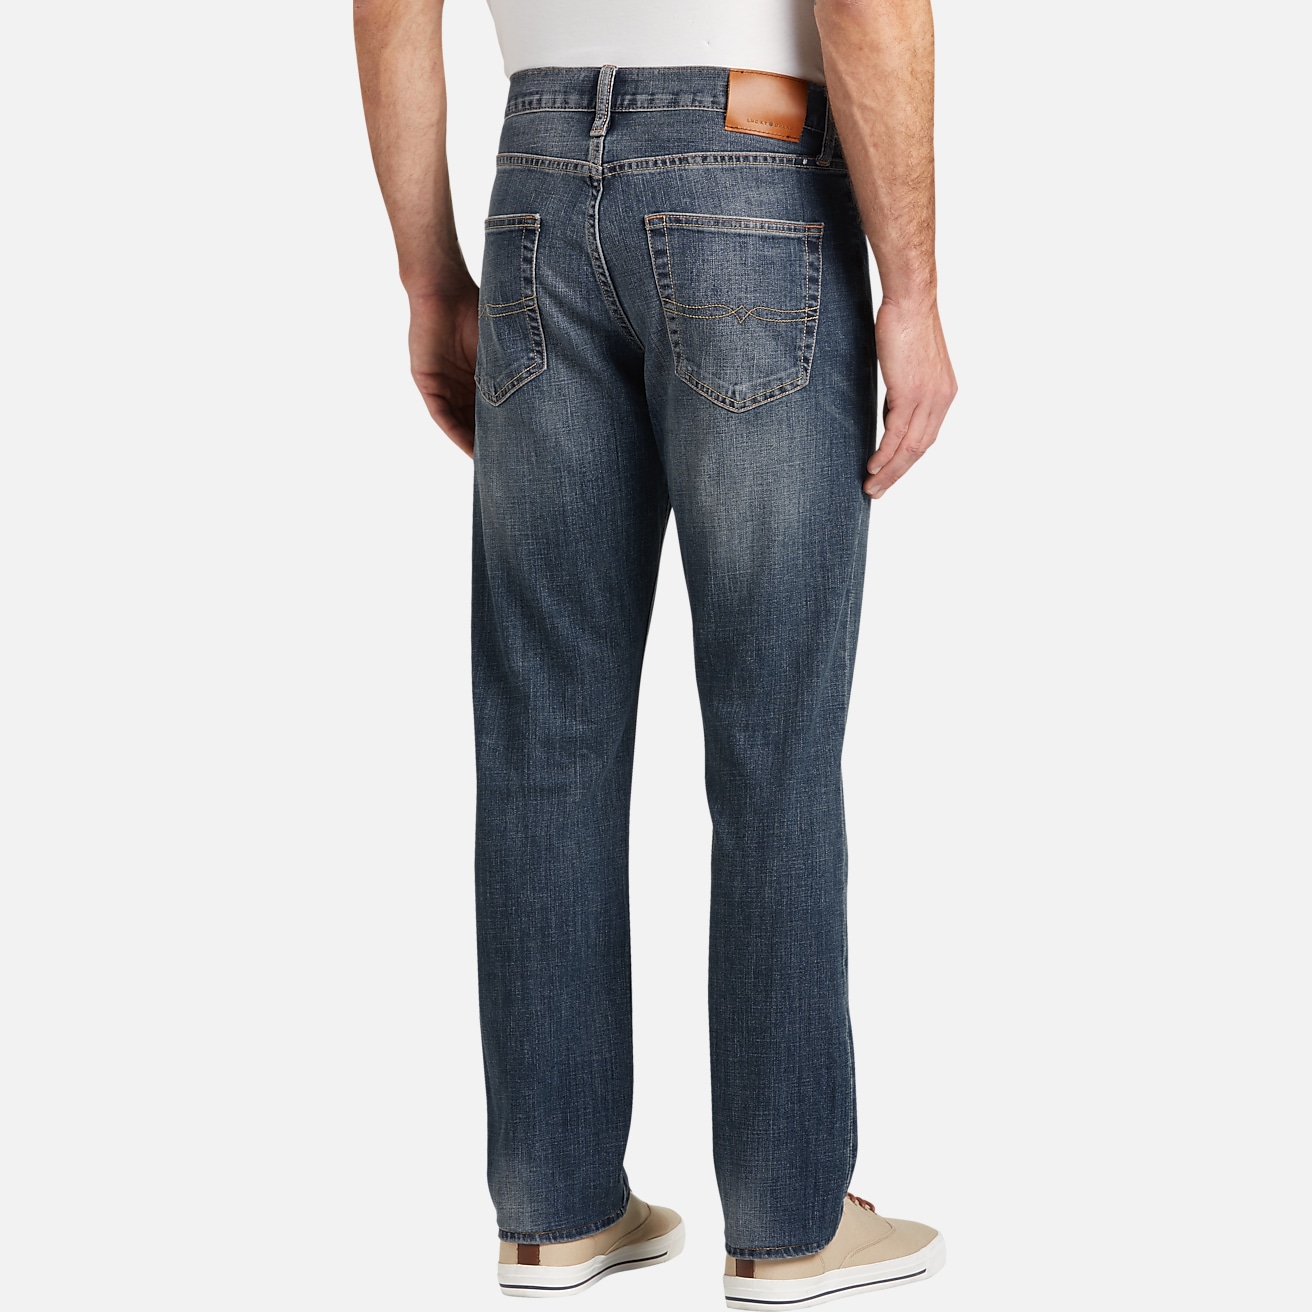 Lucky Brand Men's 410 Athletic Fit Straight Leg Coolmax Jeans